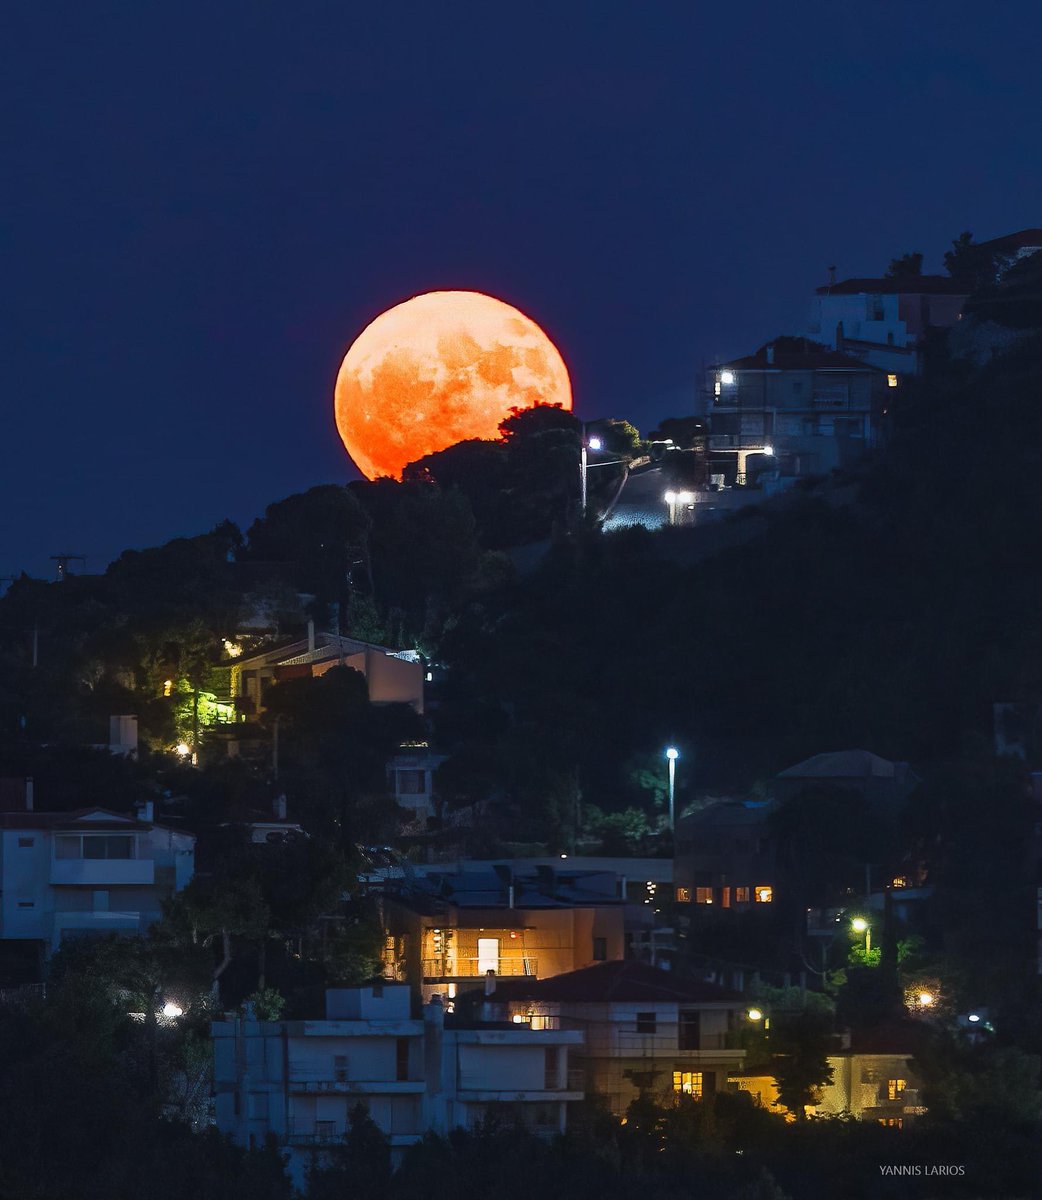 Today’s #fullmoon rising over Pentelikon Mt houses, in #Athens #Greece. More is at link in profile Η αποψινή πανσέληνος ανατέλει πάνω από την Πεντέλη #weather #meteo #meteogr #yannislarios #skaikairos